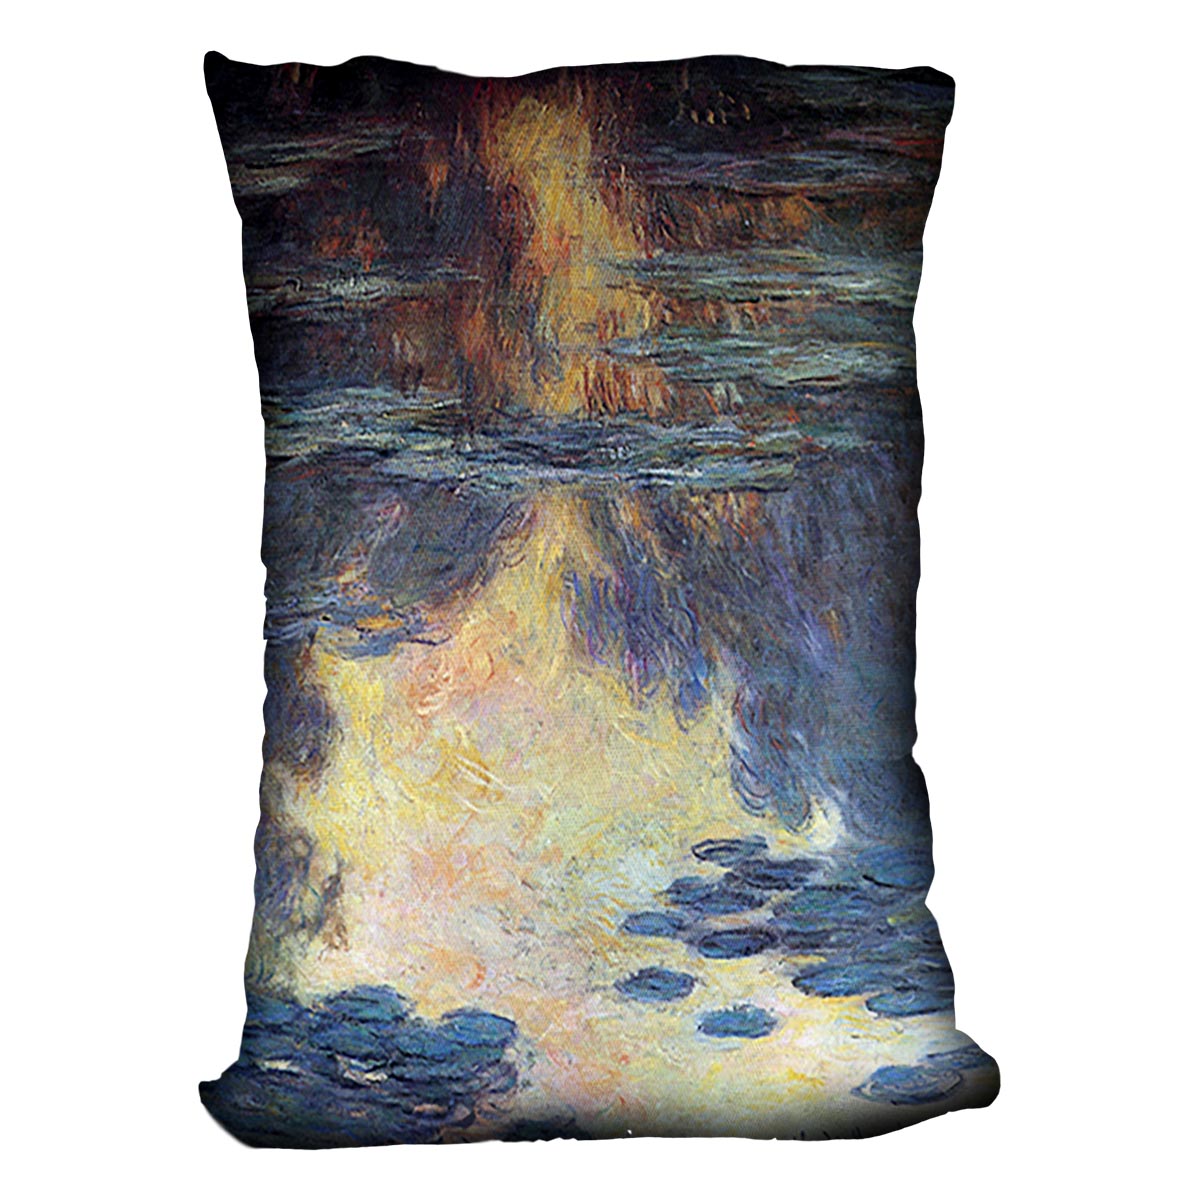 Water lilies water landscape 2 by Monet Cushion